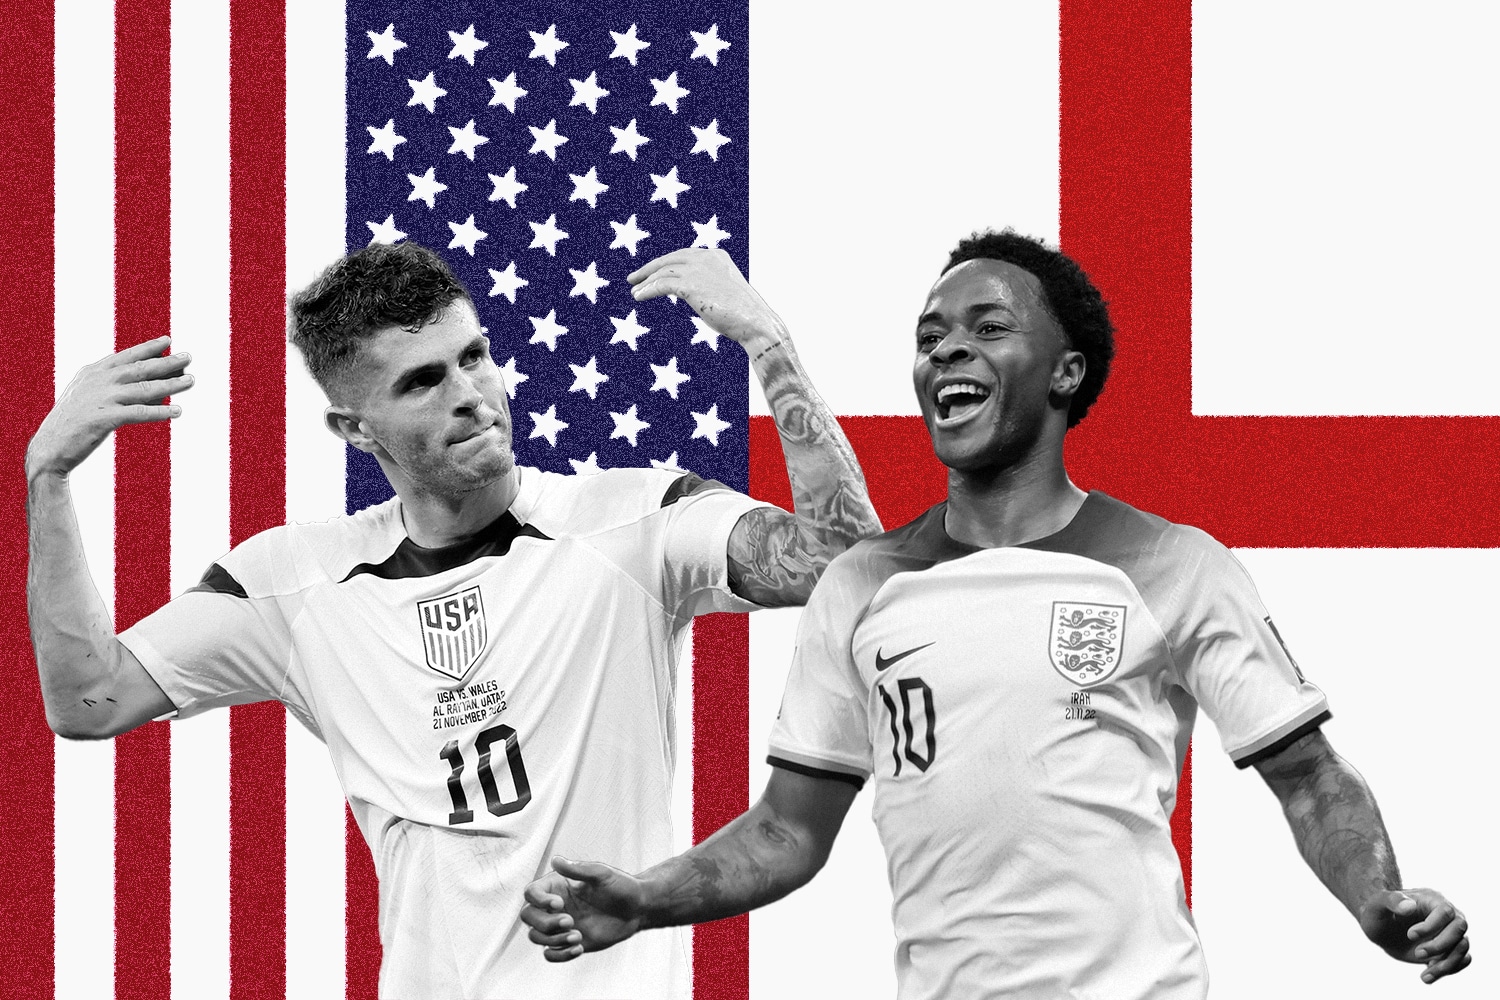 Christian Pulisic and Raheem Sterling standing in front of their nations' flags ahead of match-up between the United States and England in the World Cup